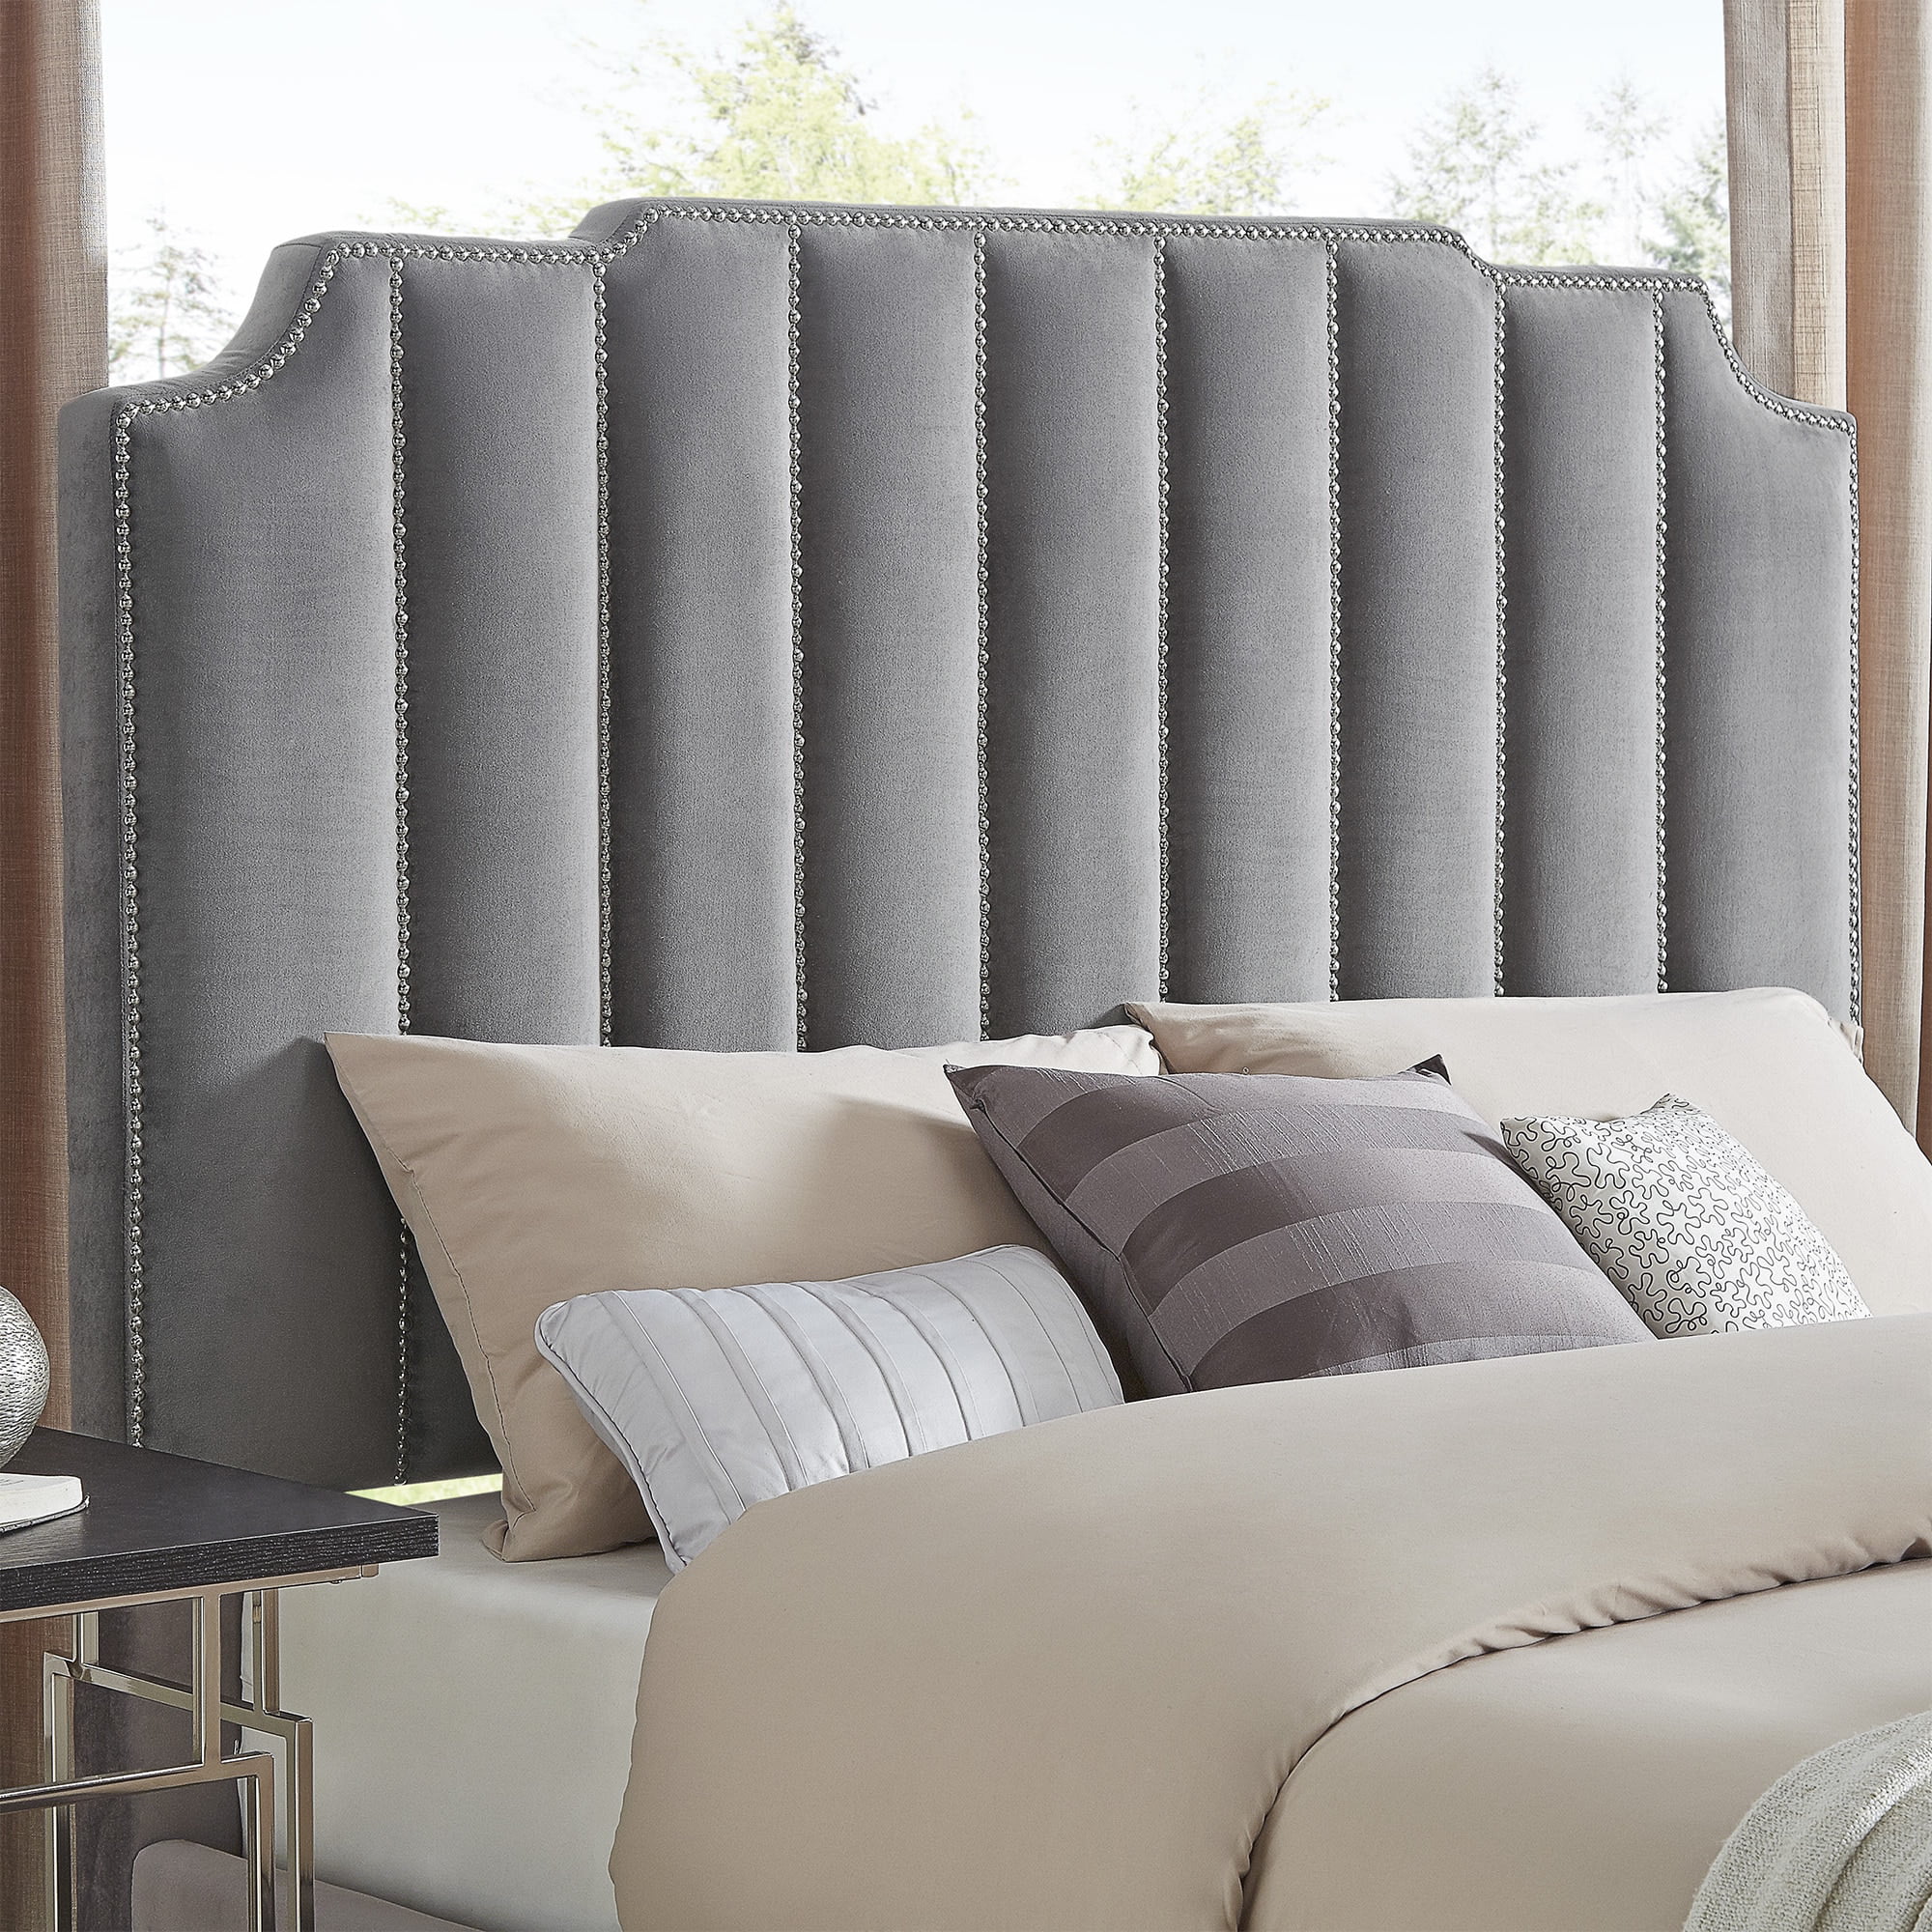 Details about   Crosley Furniture Cassie Upholstered King California King Headboard in Bourbon 